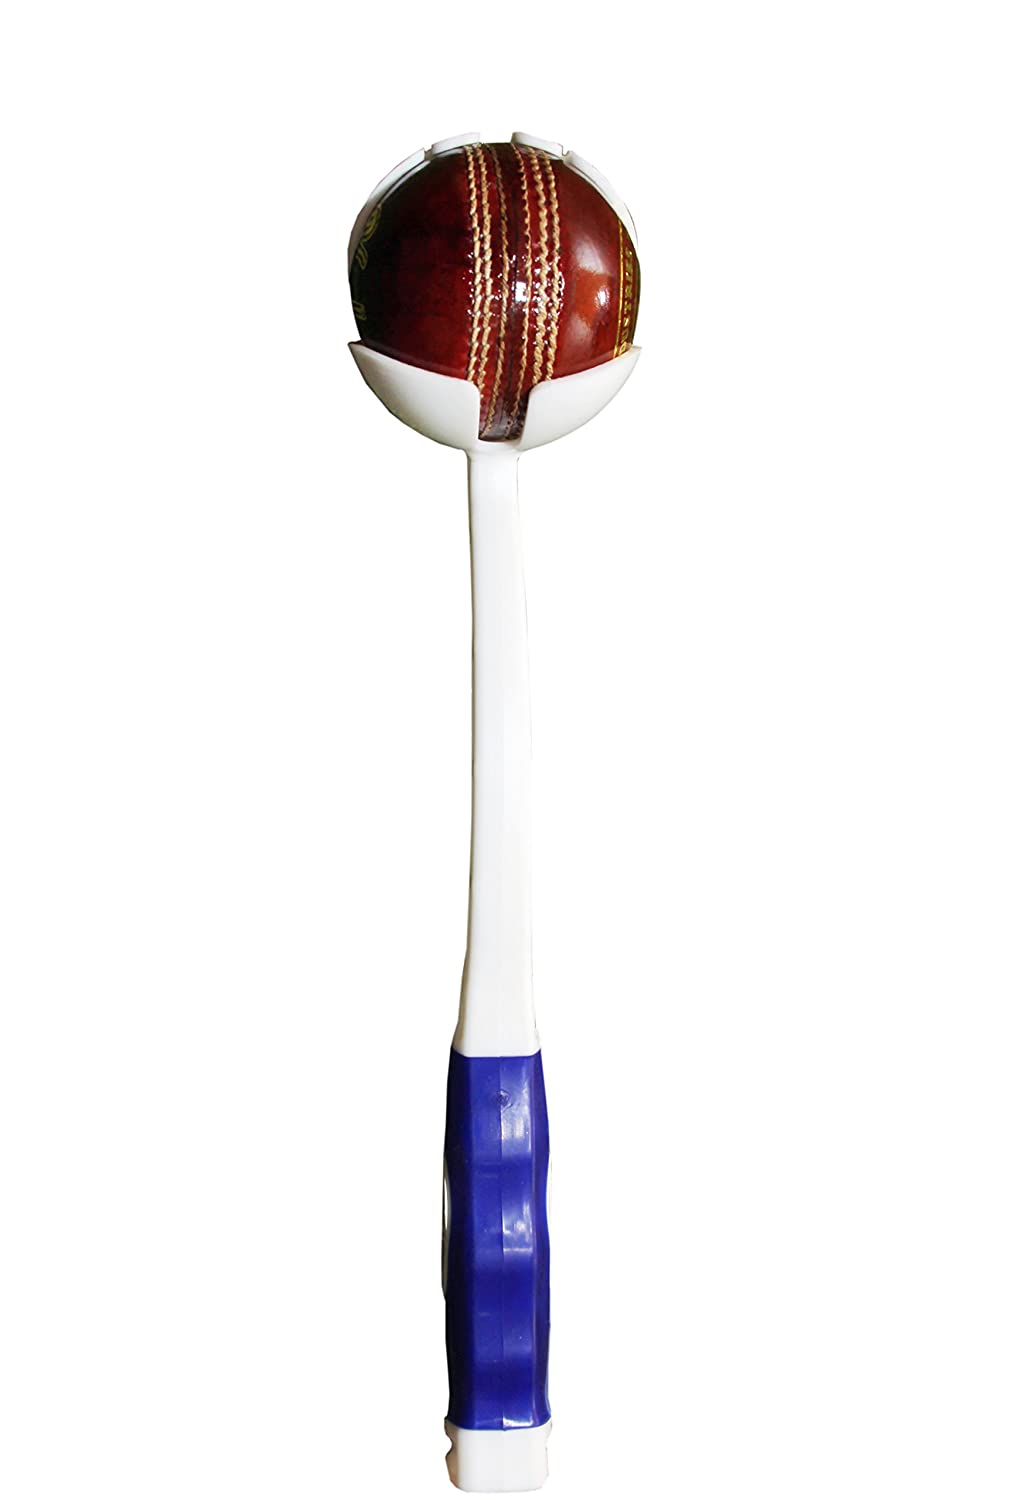 Cricket Ball Thrower Leather Ball Thrower Bowling Thrower Machines pack of1 Blue